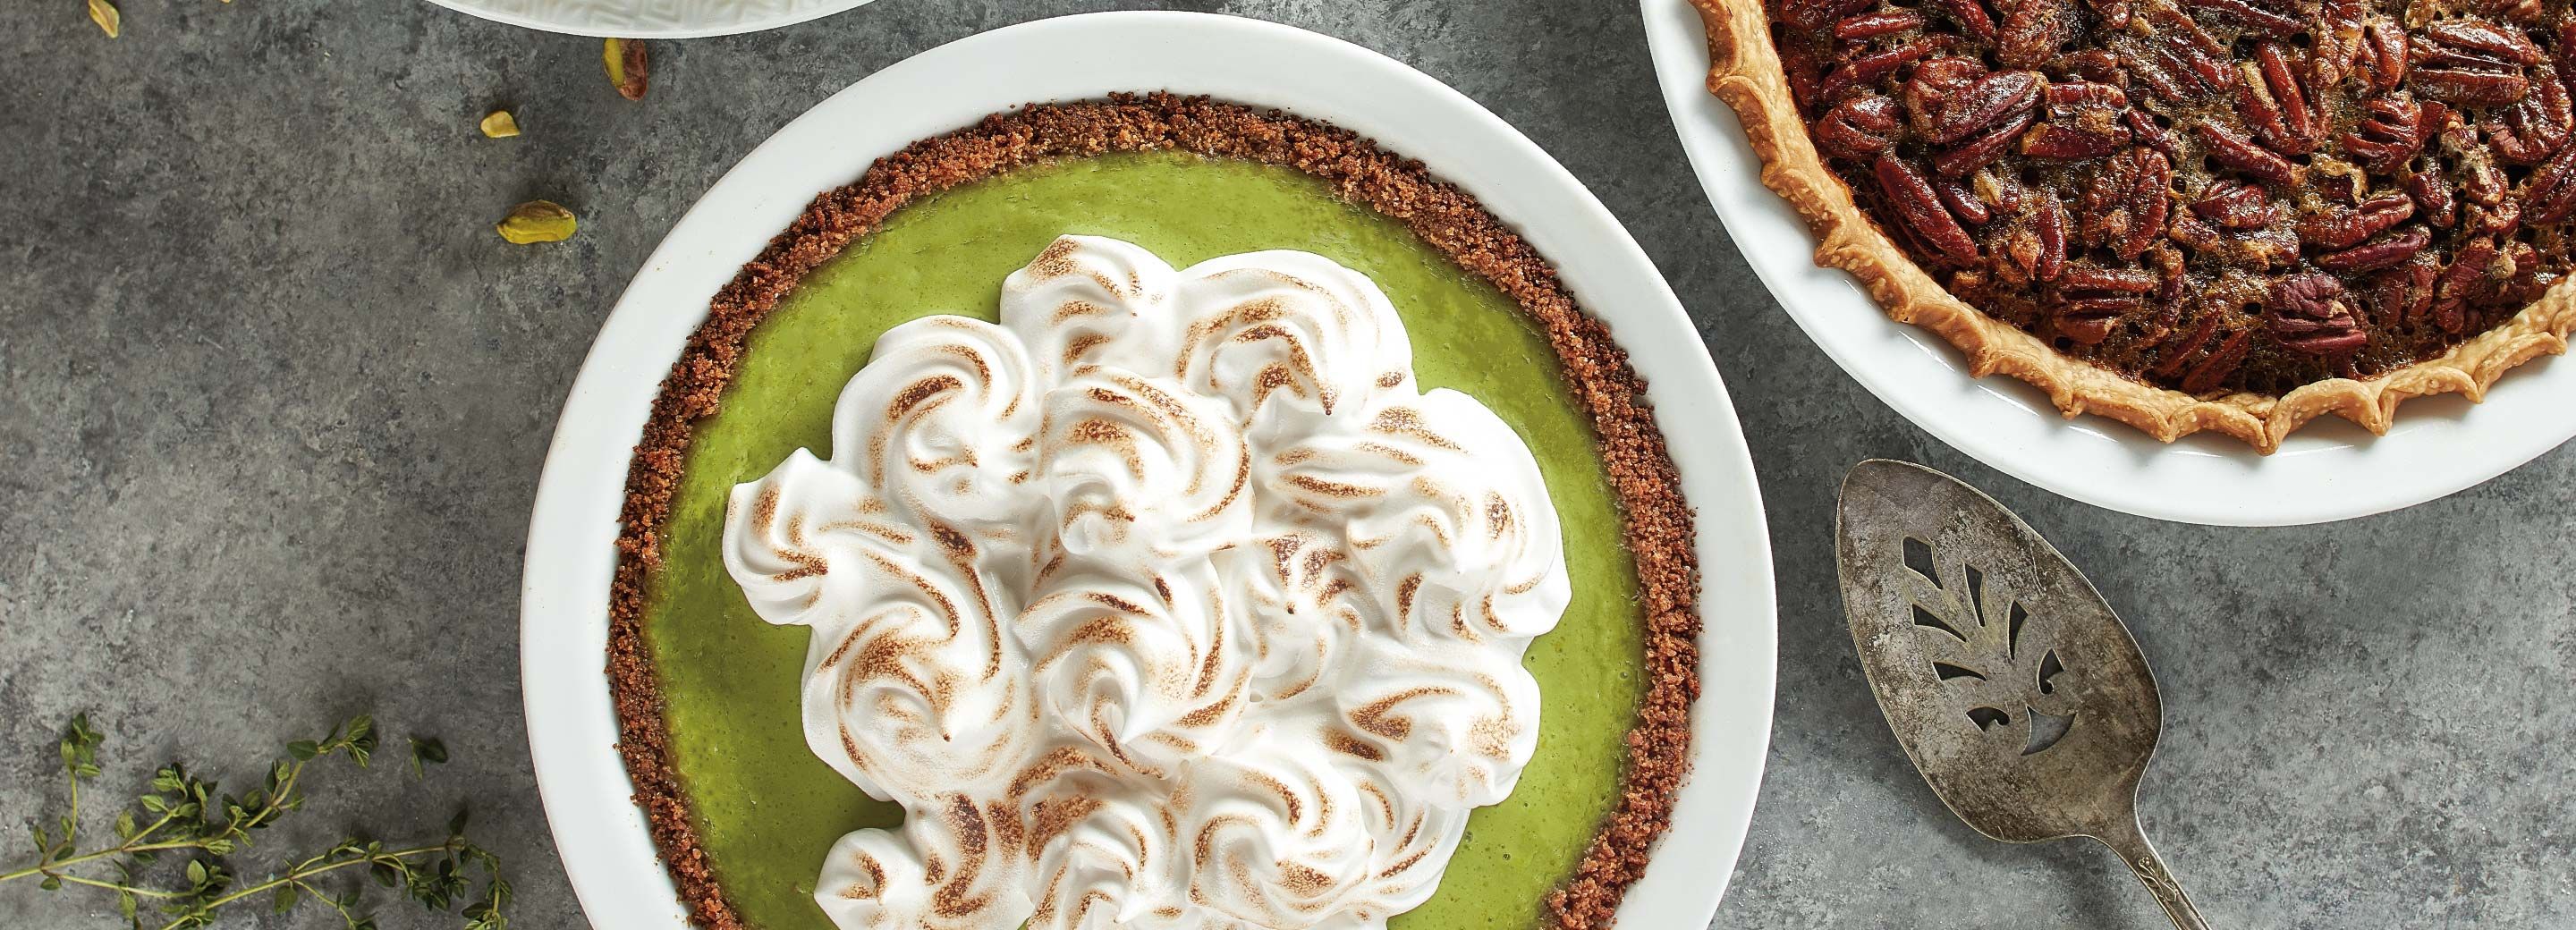 This Pie is Sub-Lime